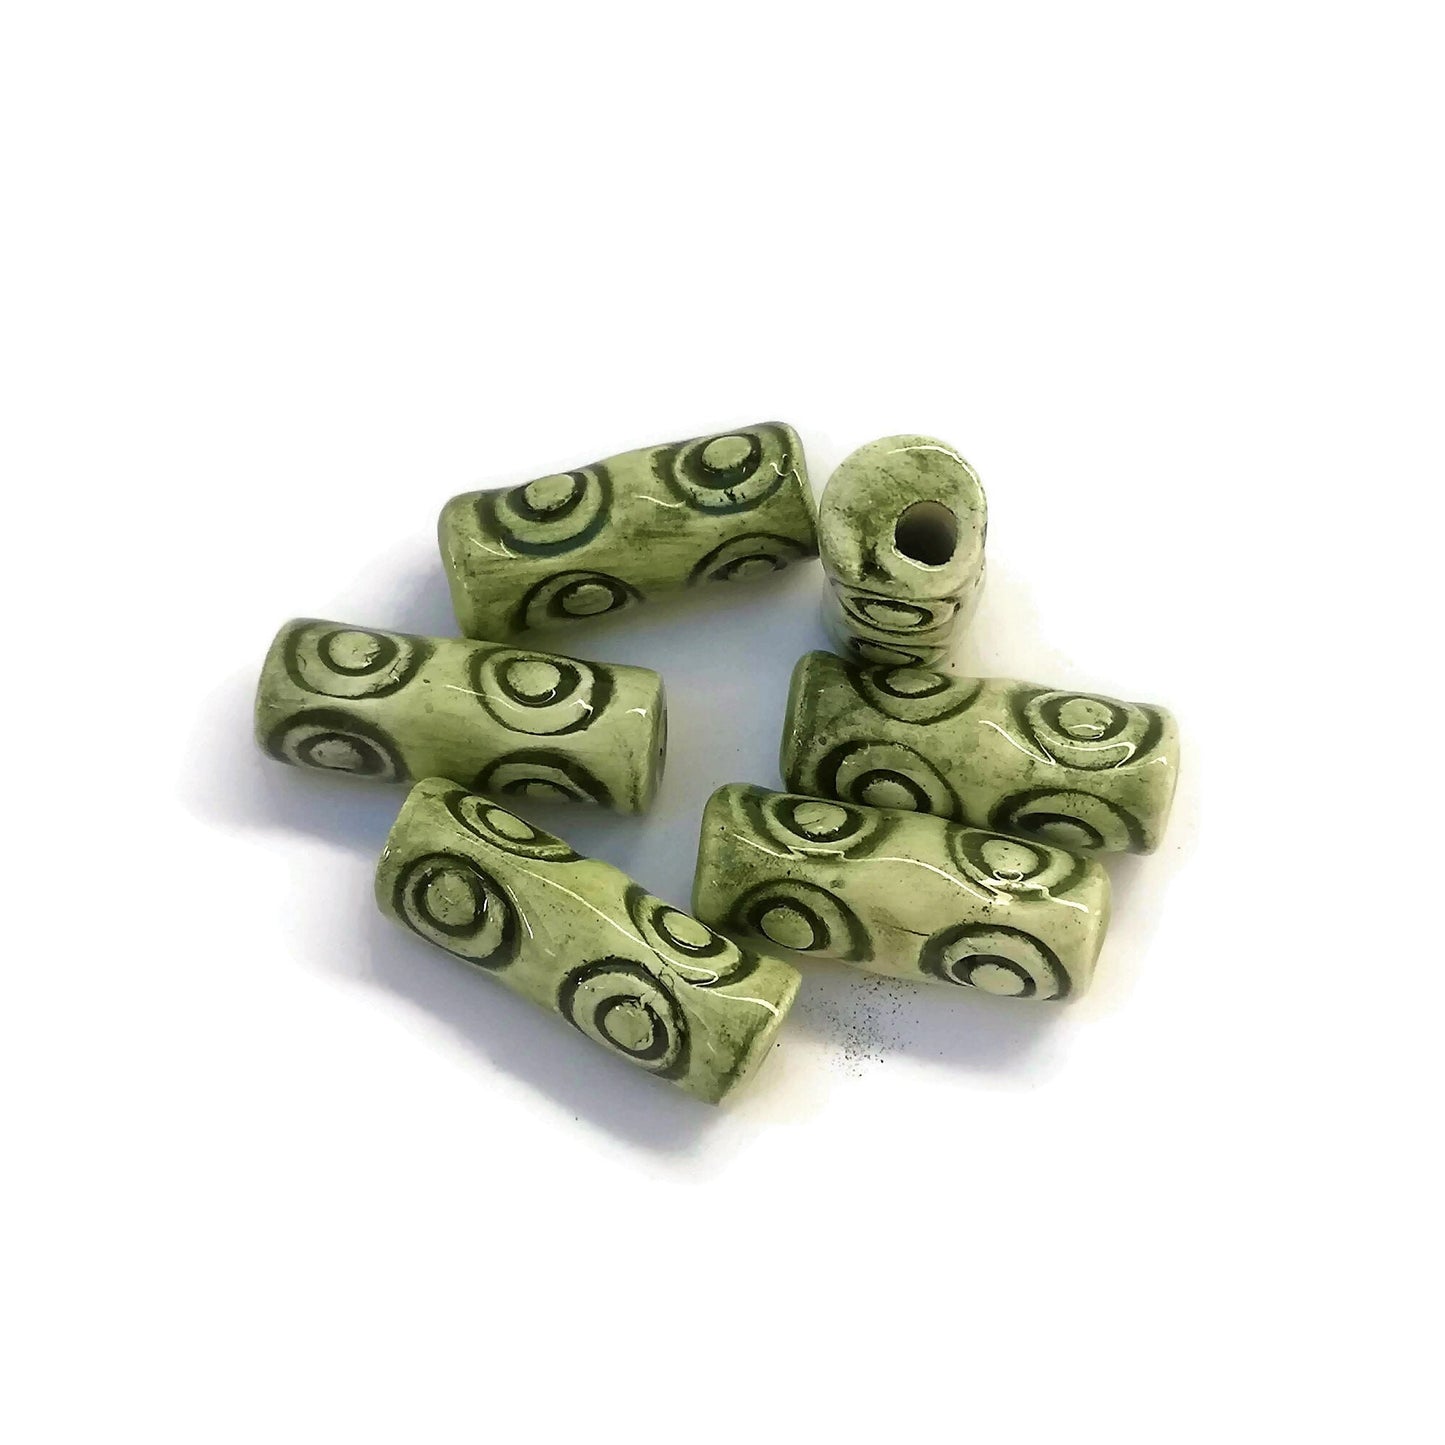 6 Pcs Unique Macrame Beads Large Hole 4 mm, Ceramic Tube Beads 30mm Long For Jewelry Making, Best Sellers Green Clay Beads - Ceramica Ana Rafael